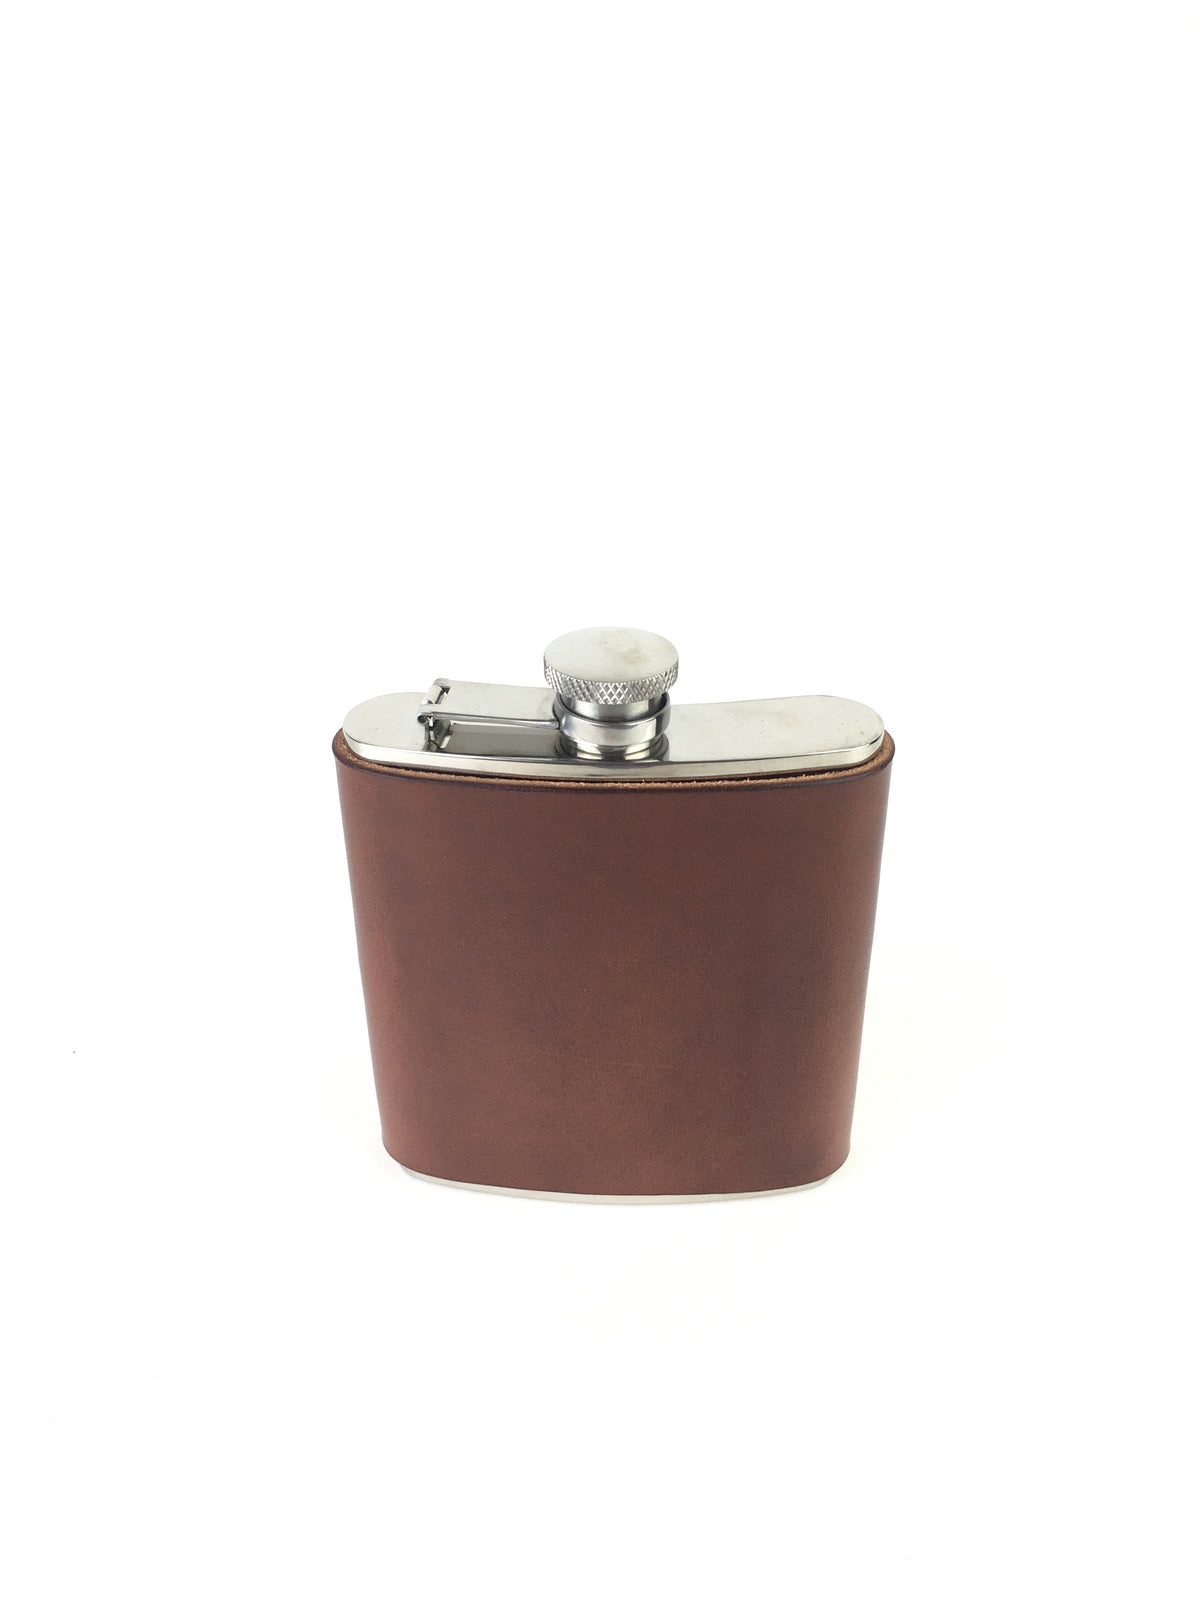 H+B WHISKY FLASK | ESPRESSO BROWN LEATHER